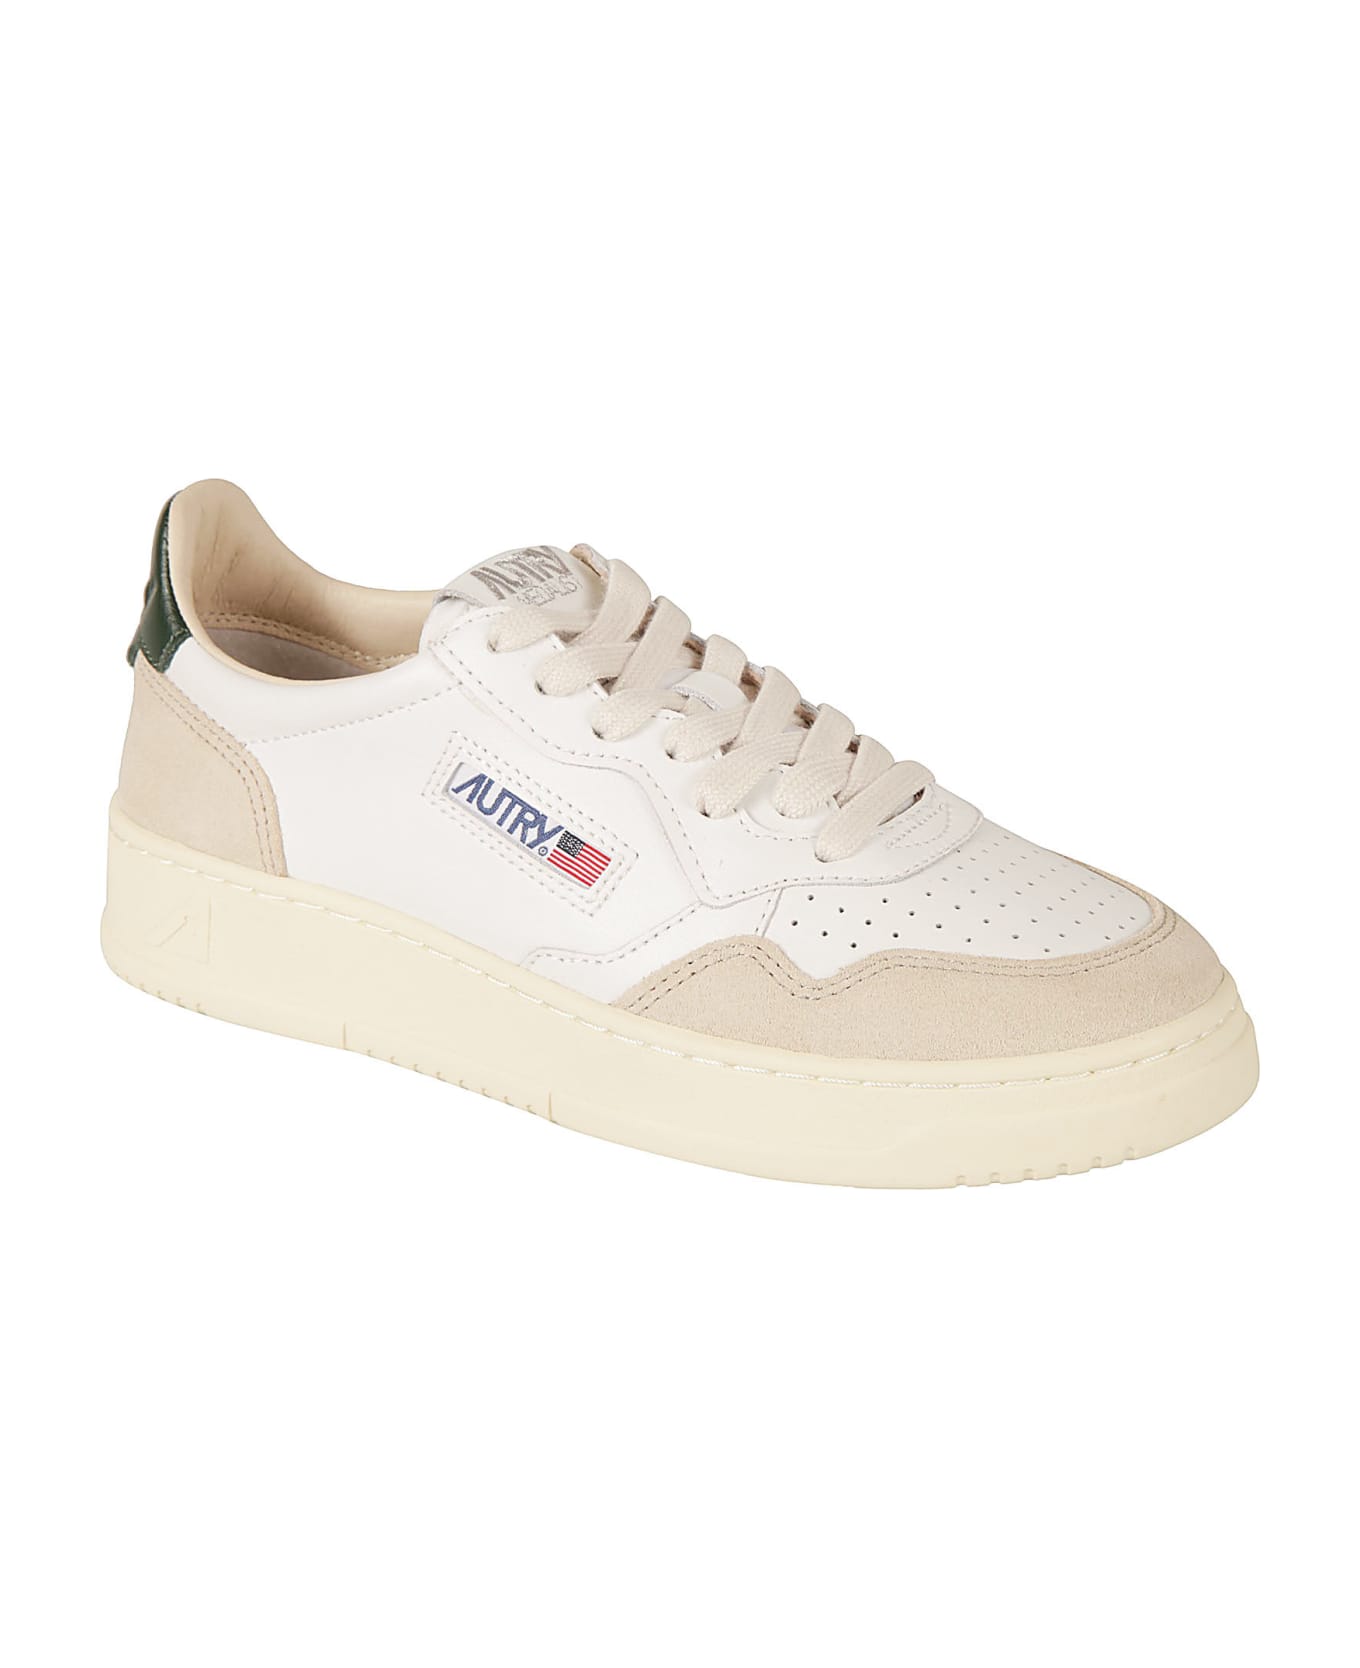 Autry Medalist Low Sneakers - White/Mount